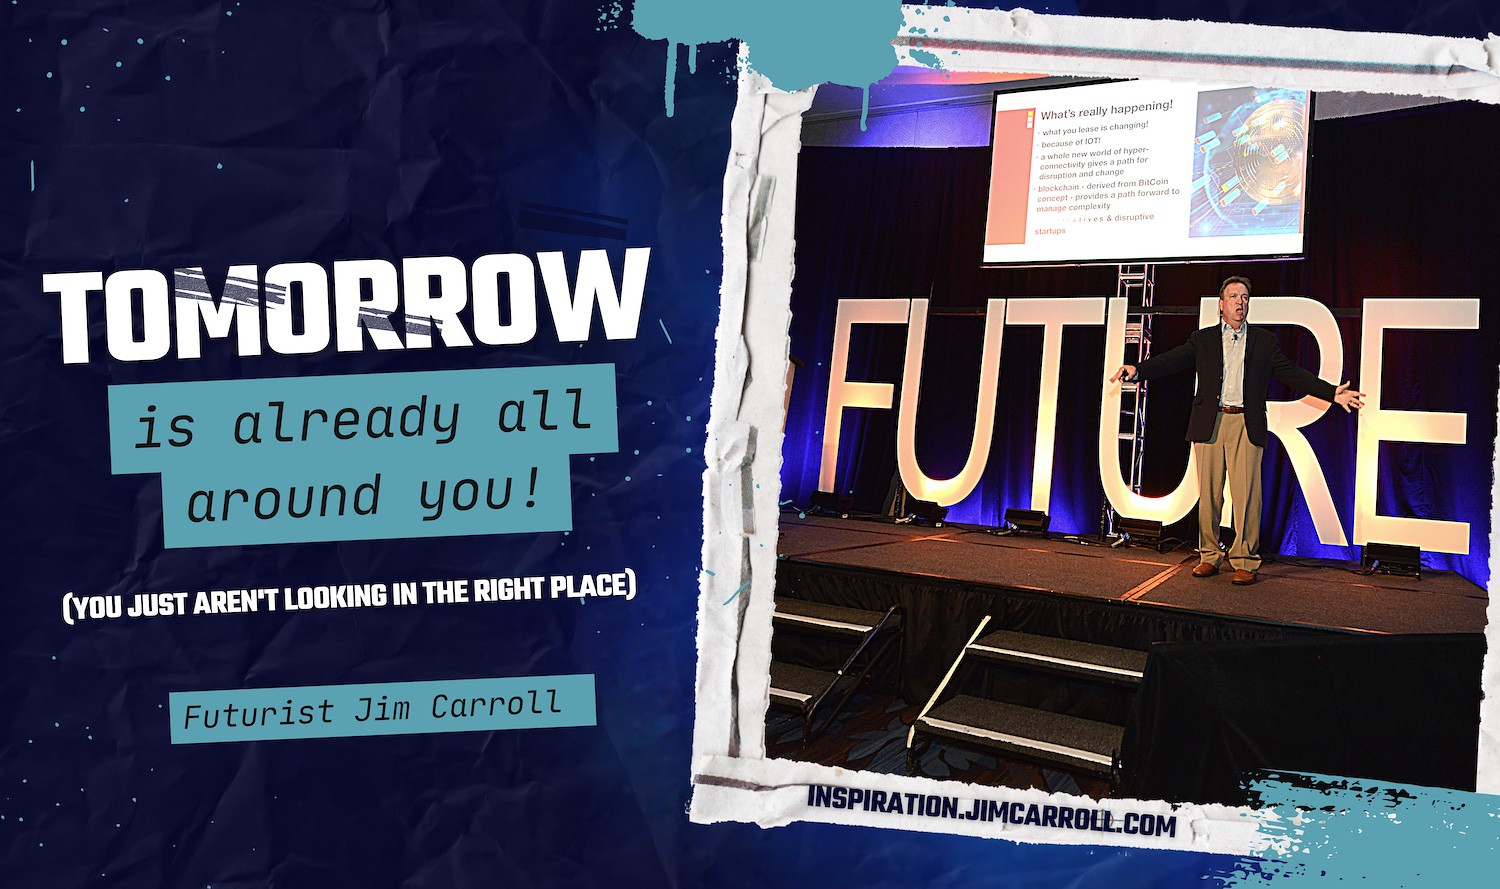 "Tomorrow is already all around you! (You just aren't looking in the right place!)" - Futurist Jim Carroll